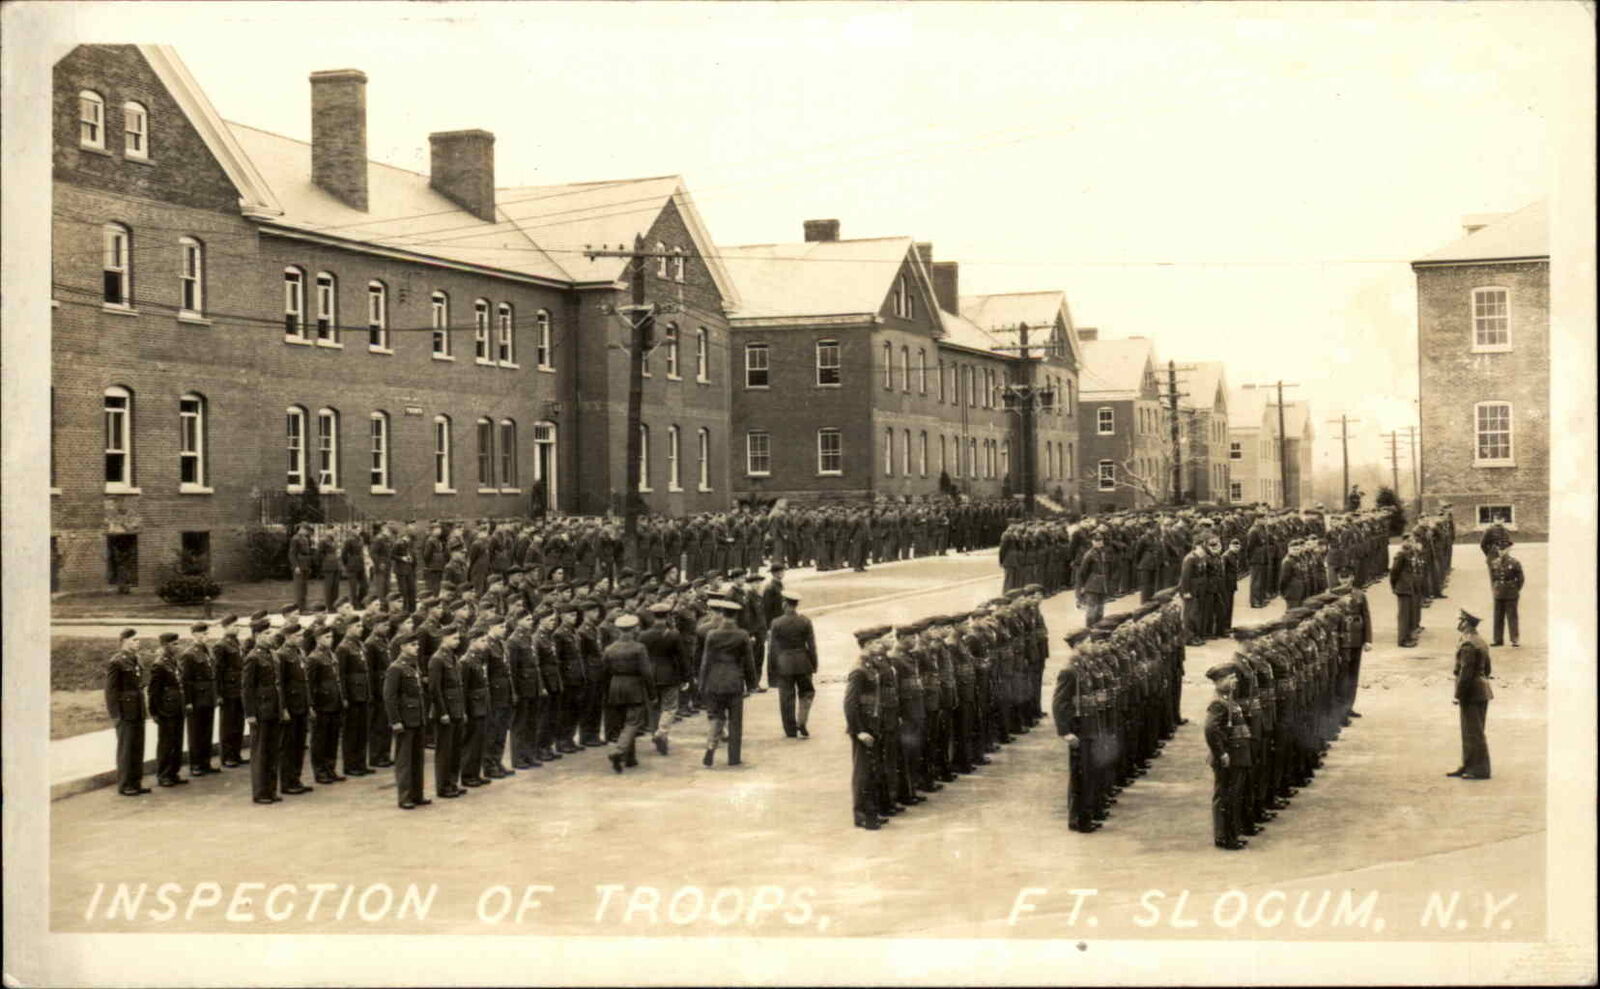 Fort Ft. Slocum New York NY Troop Inspection Real Photo Postcard